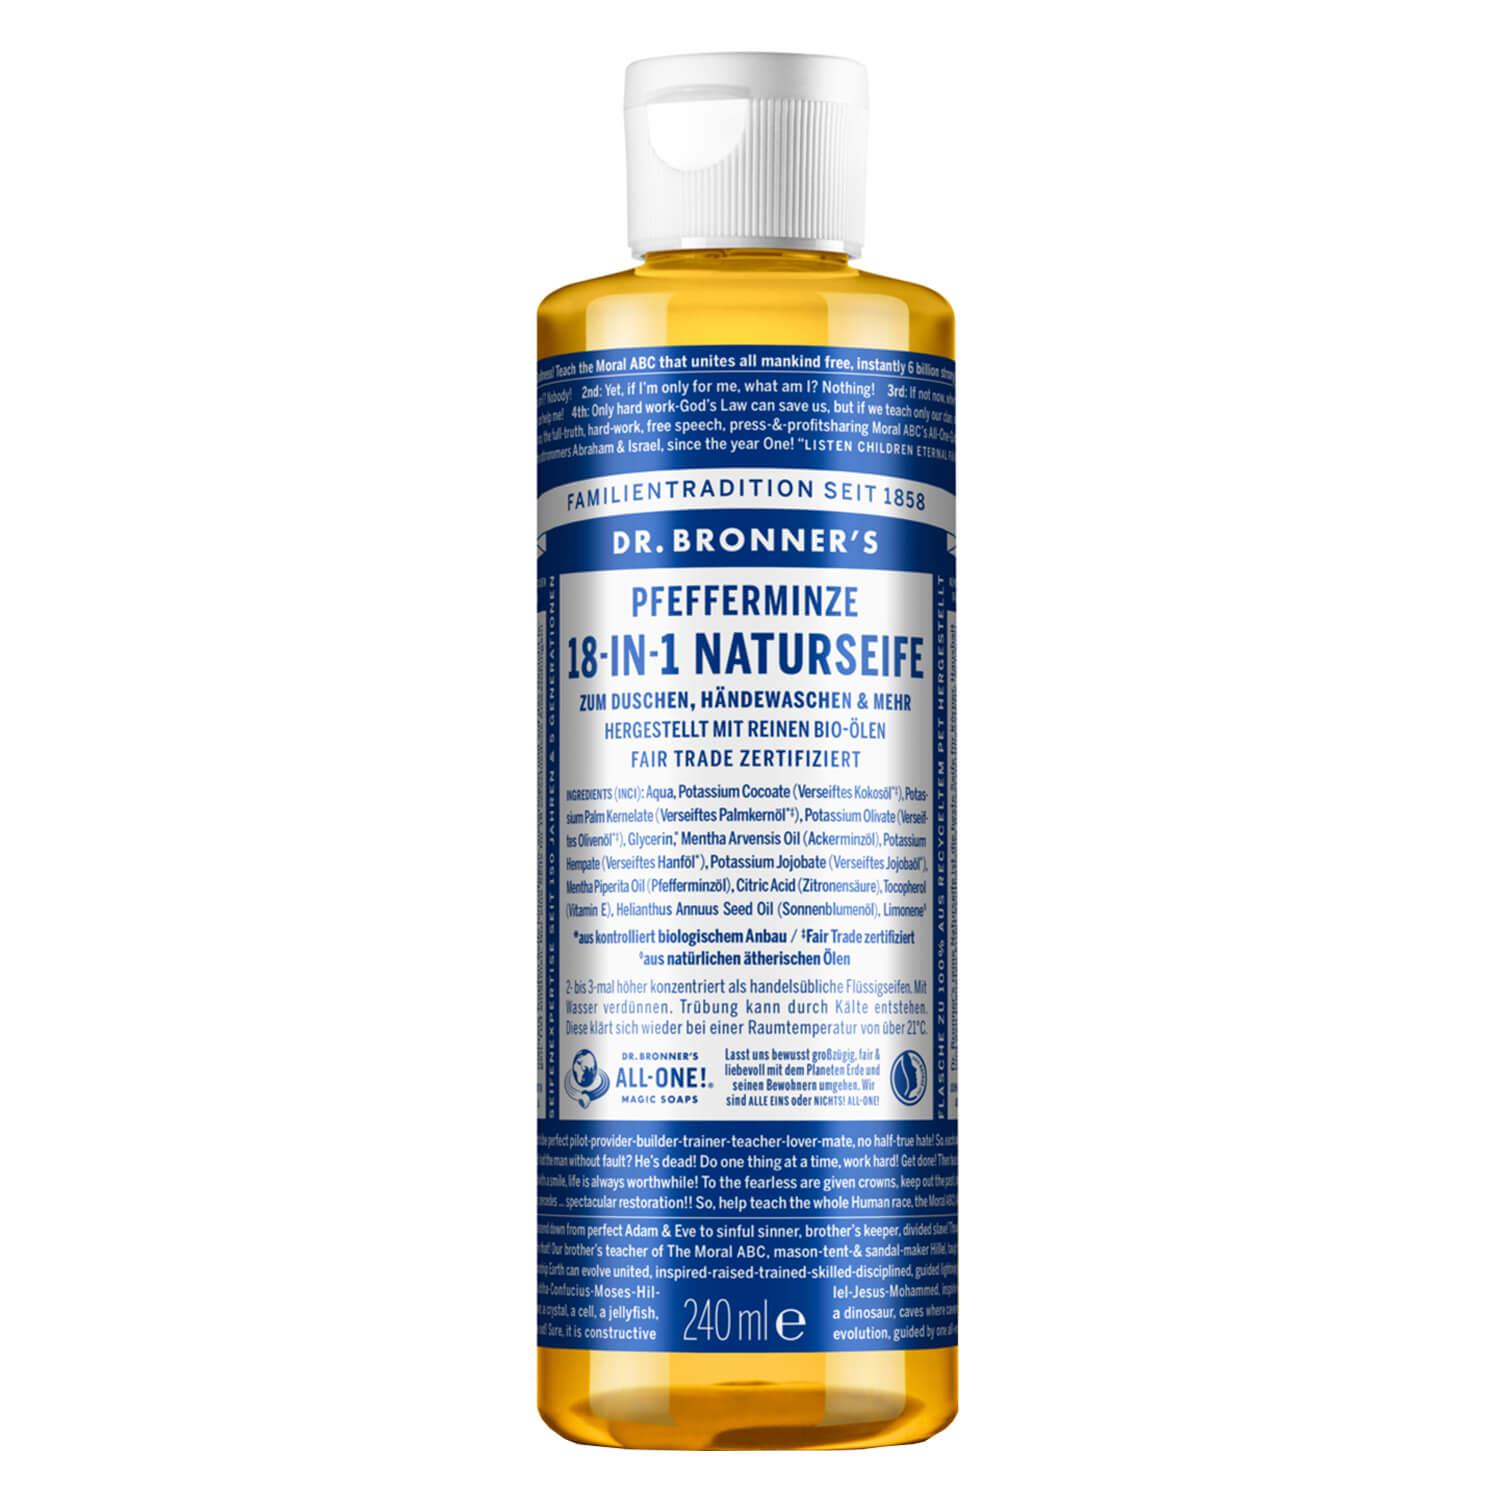 DR. BRONNER'S - 18-IN-1 Liquid Soap Peppermint